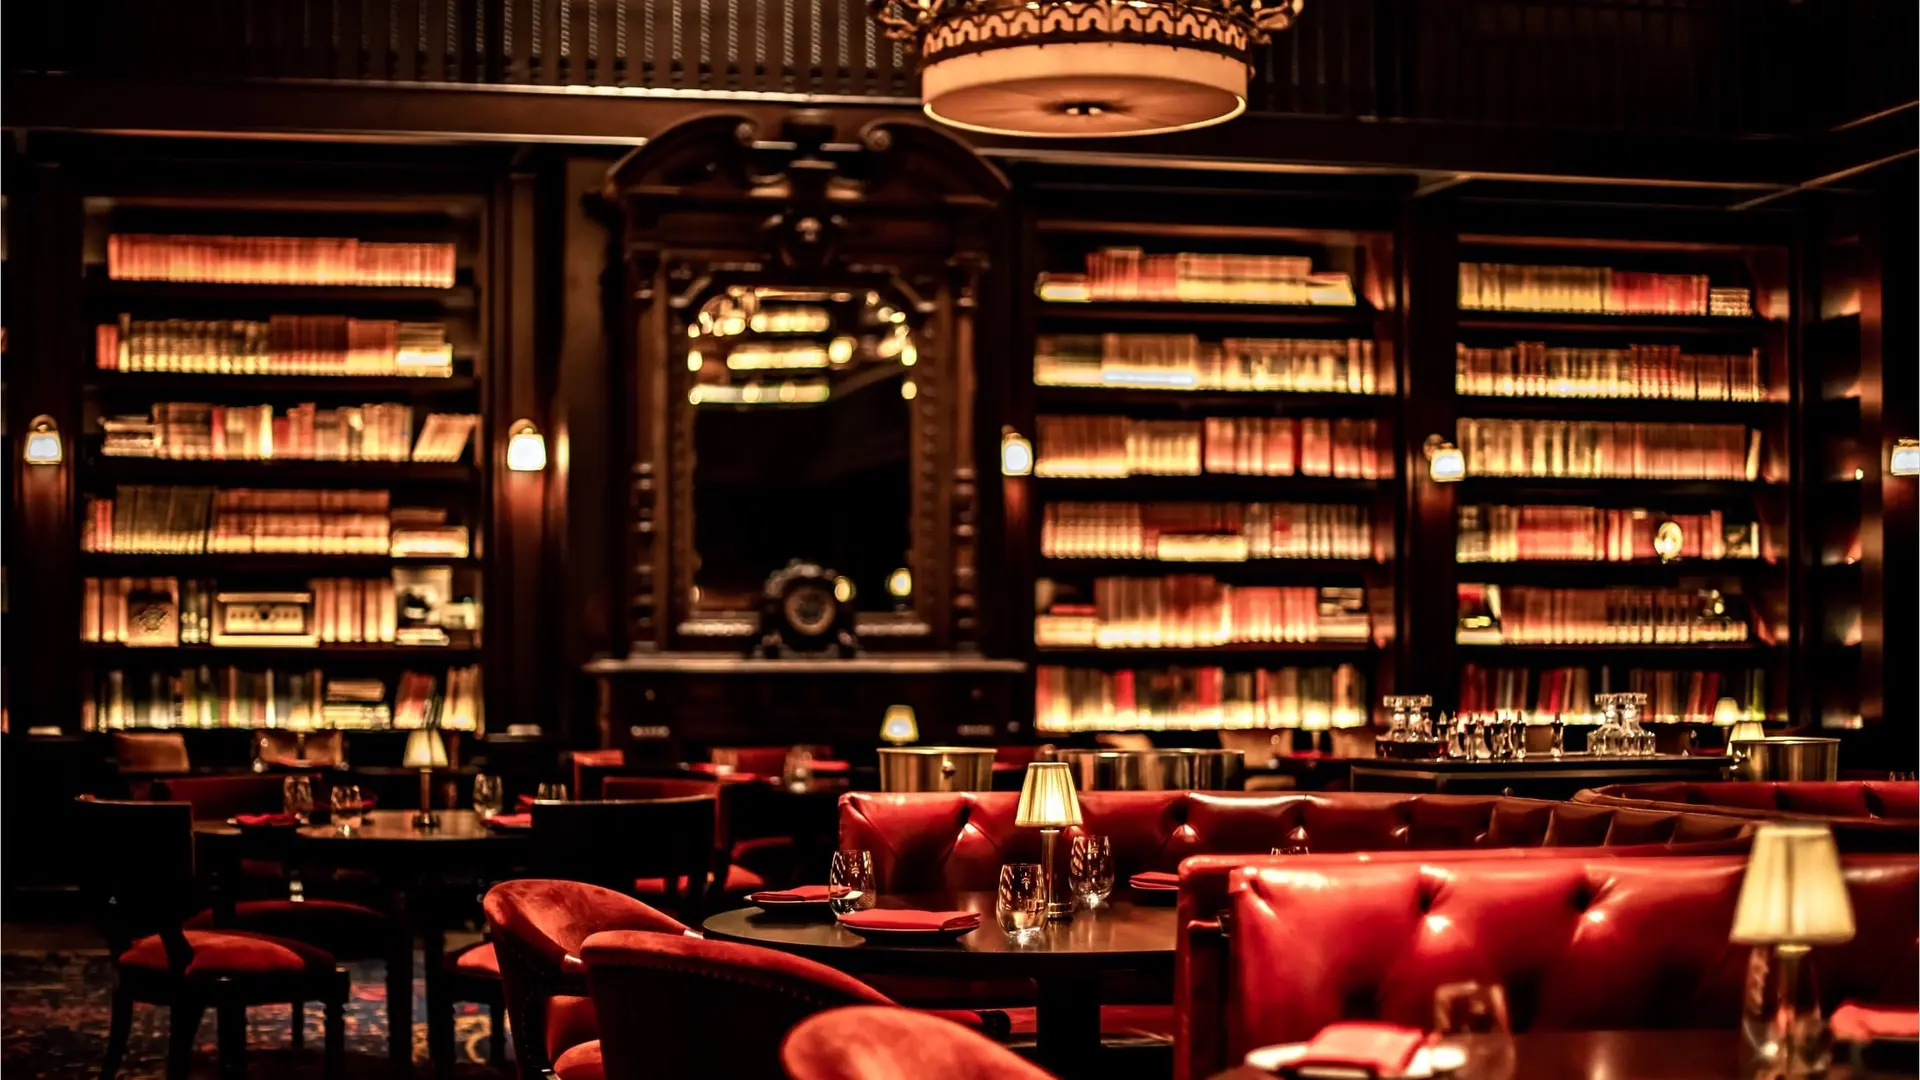 Dining area at The NoMad Las Vegas, with red leather sofas, red chairs, and black tables, tender lighting, dark wooden walls, and library.